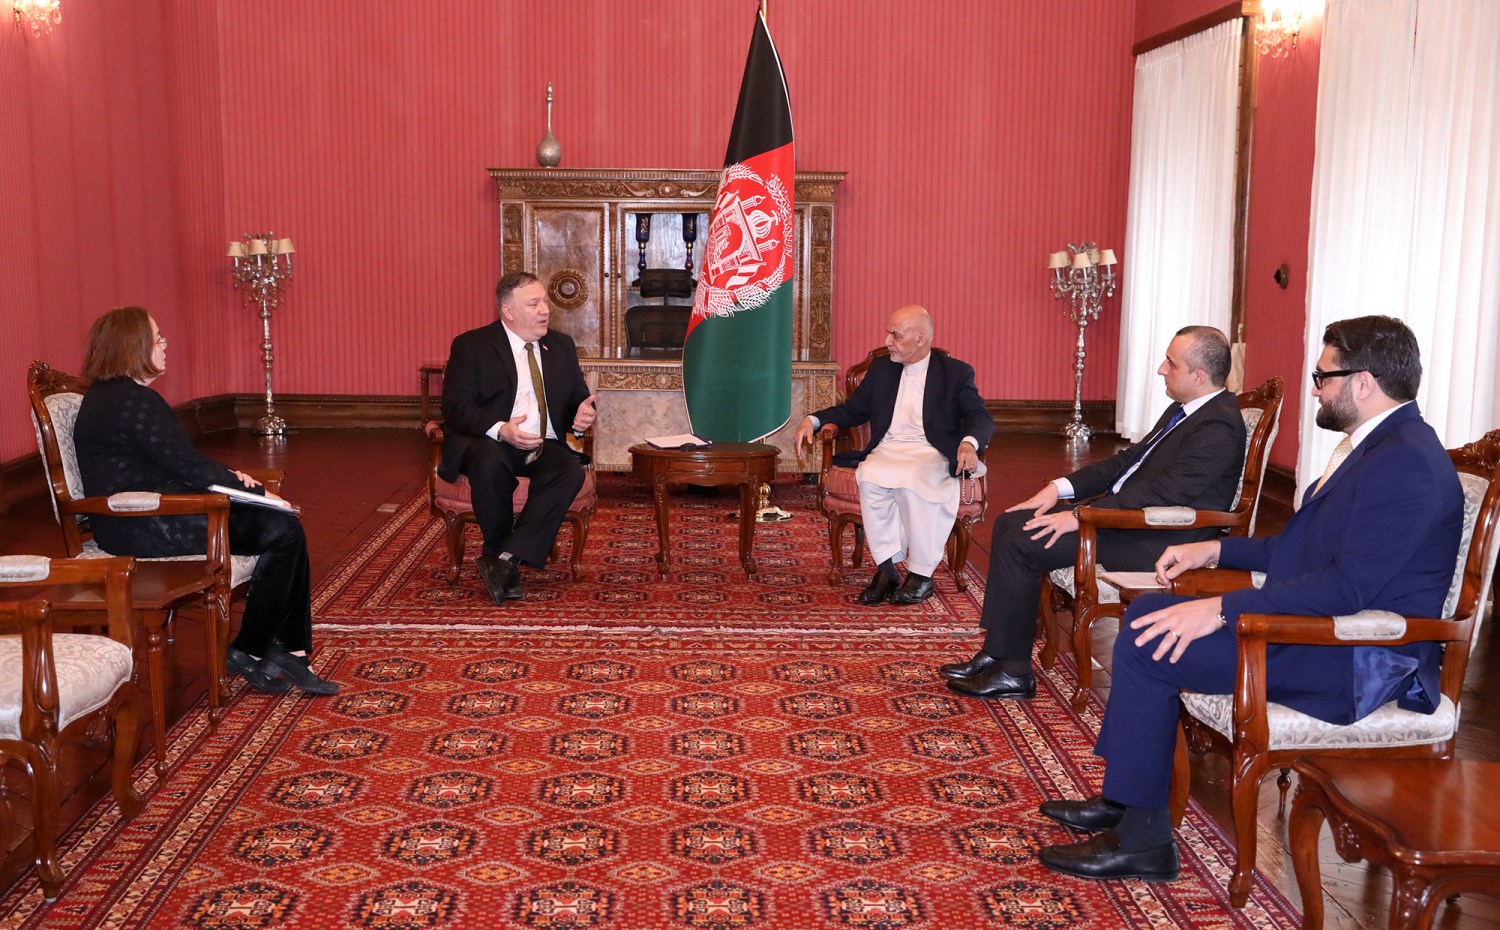 Afghanistan's President Ashraf Ghani meets with U.S. Secretary of State Mike Pompeo in Kabul, Afghanistan March 23, 2020. Afghan Presidential Palace/Handout via REUTERS     THIS IMAGE HAS BEEN SUPPLIED BY A THIRD PARTY. NO RESALES. NO ARCHIVES